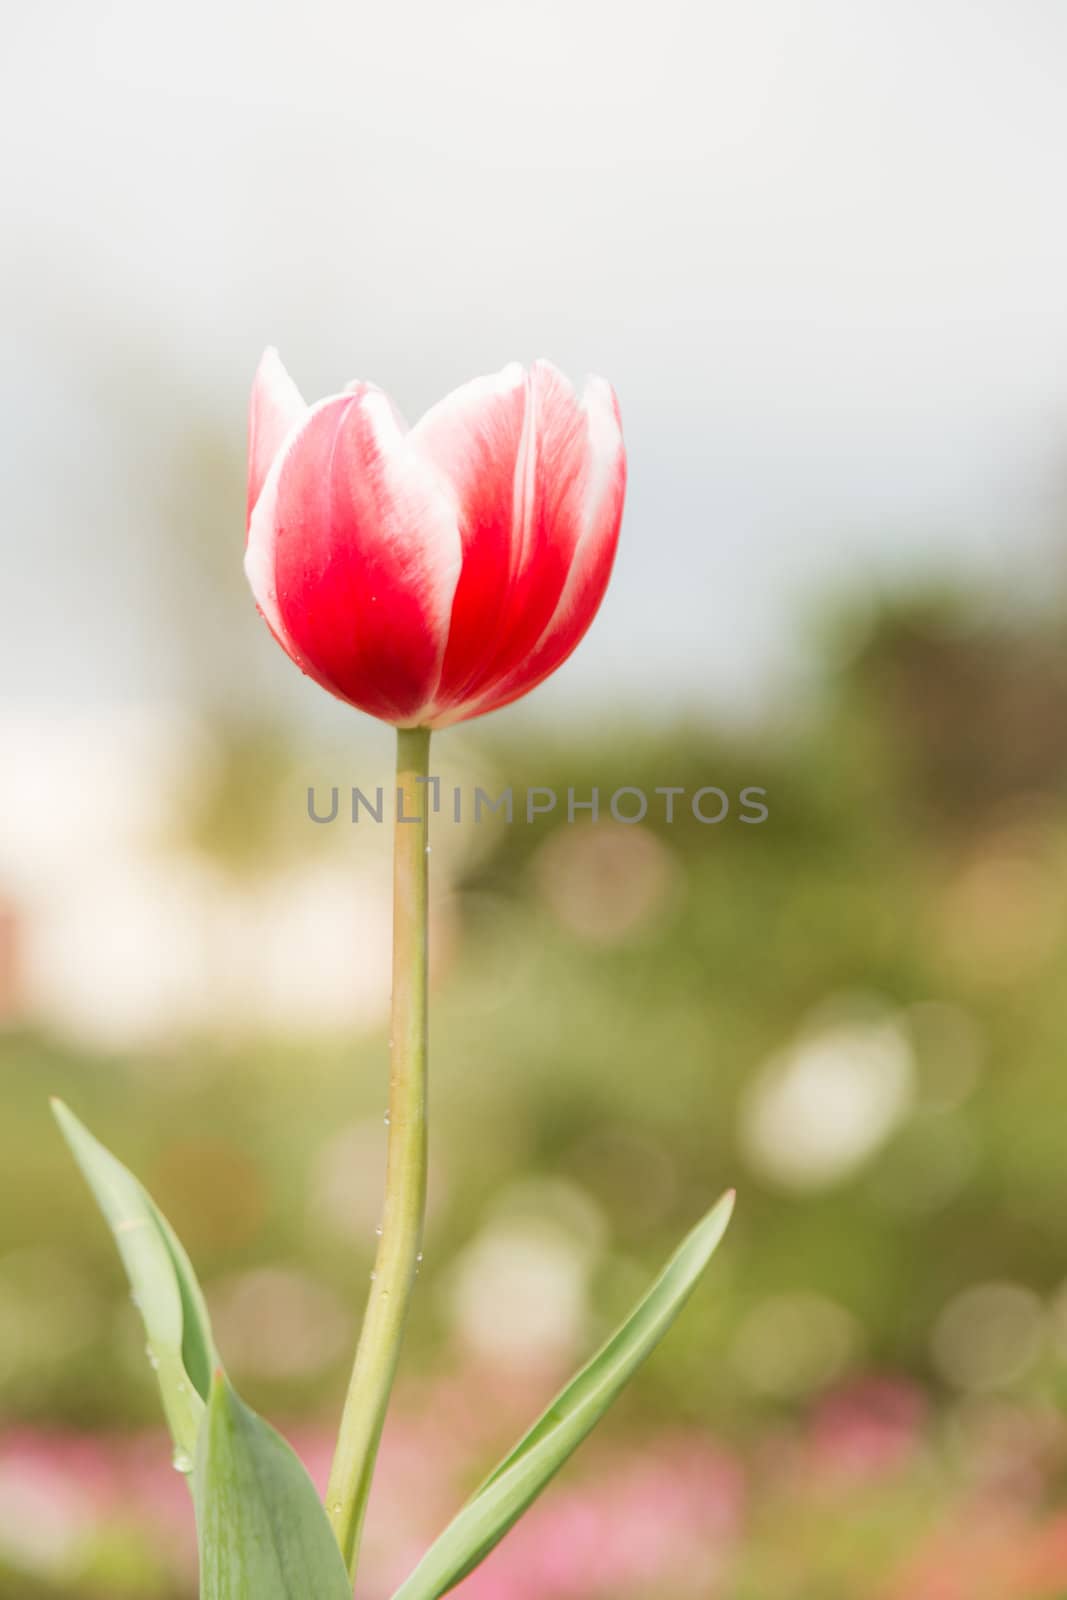 two tone color tulip flower by moggara12